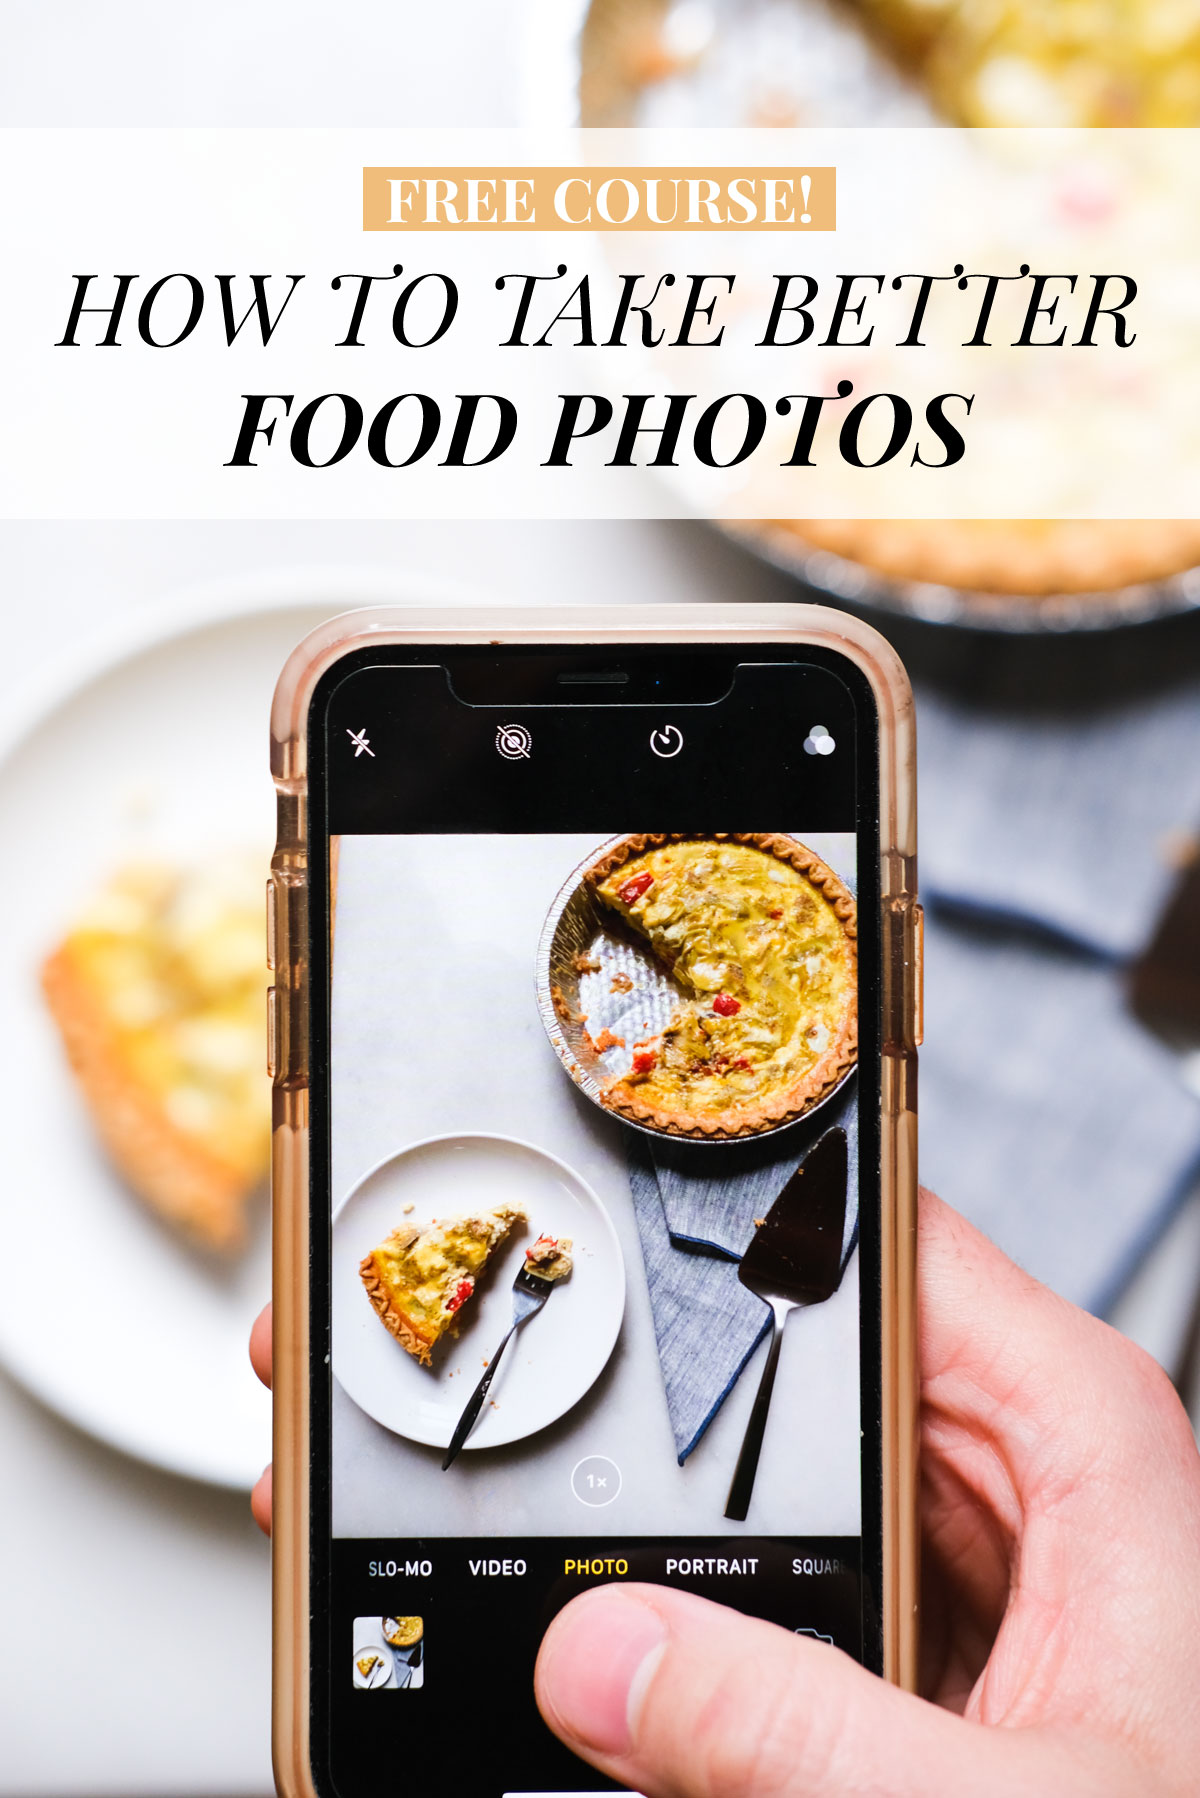 free photo course how to take better food photos